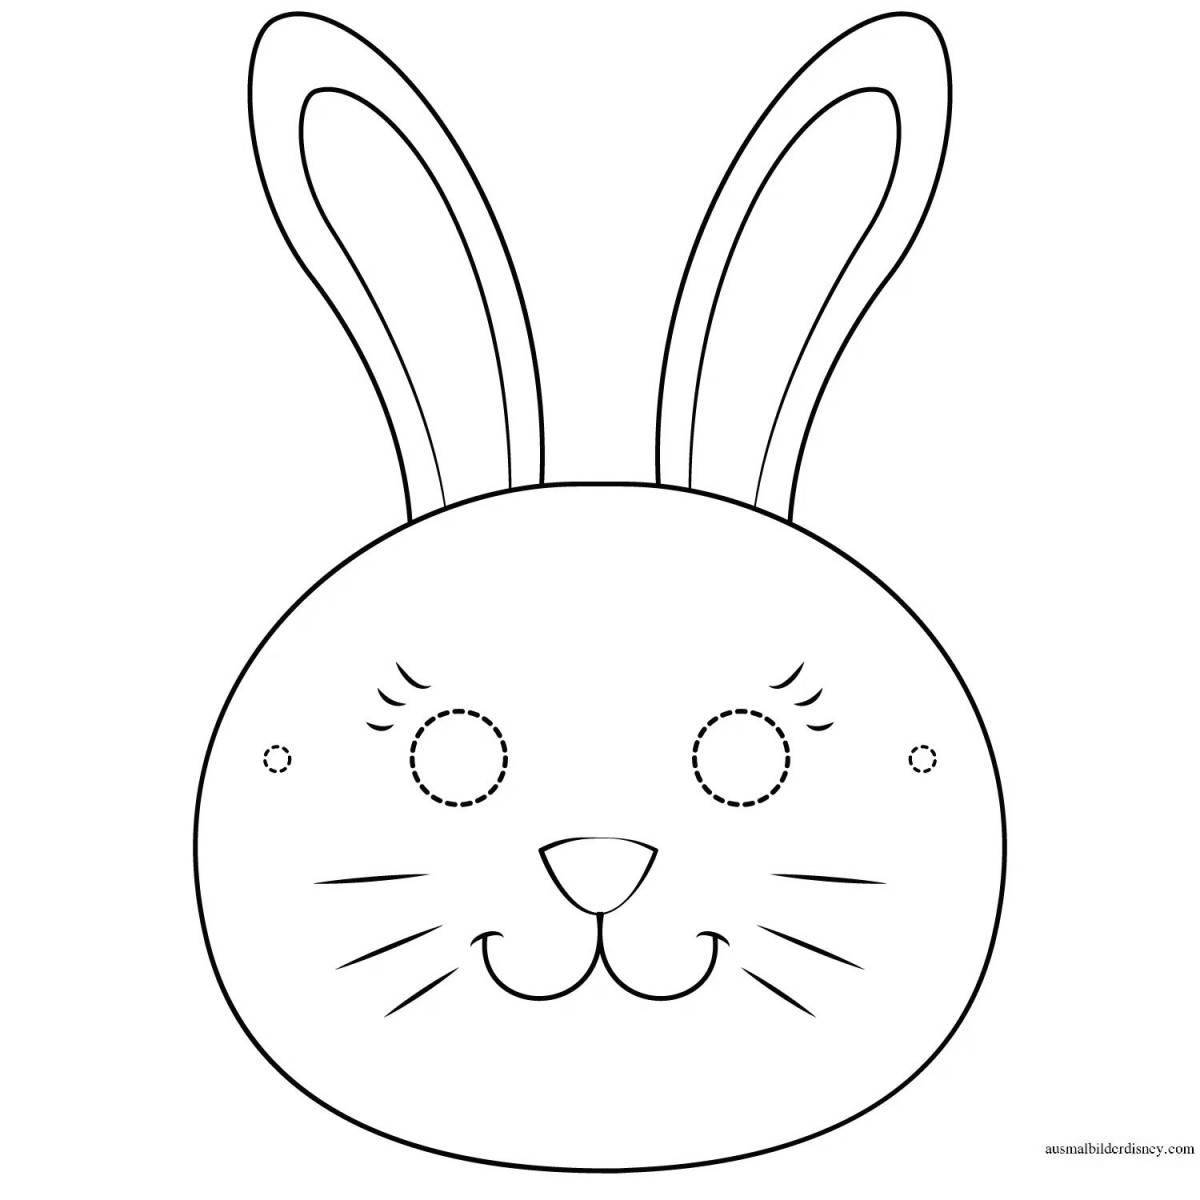 Coloring page mysterious hare mask